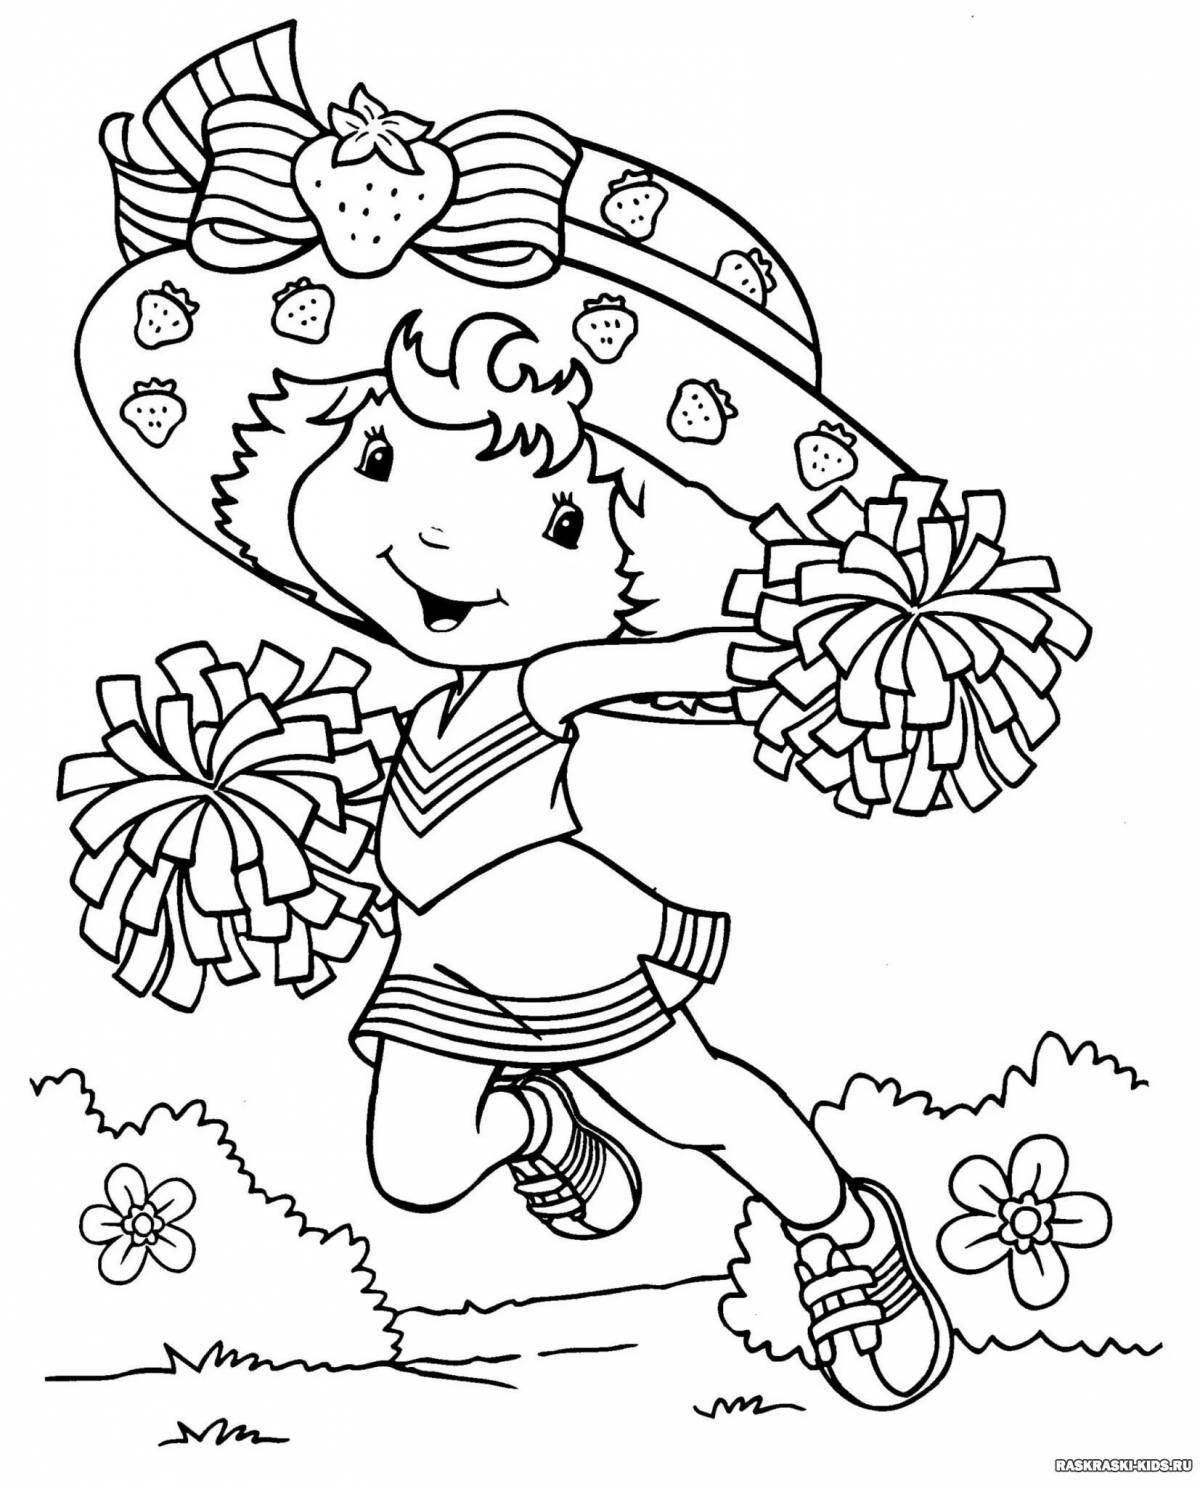 Playful coloring book for 8 year old girls